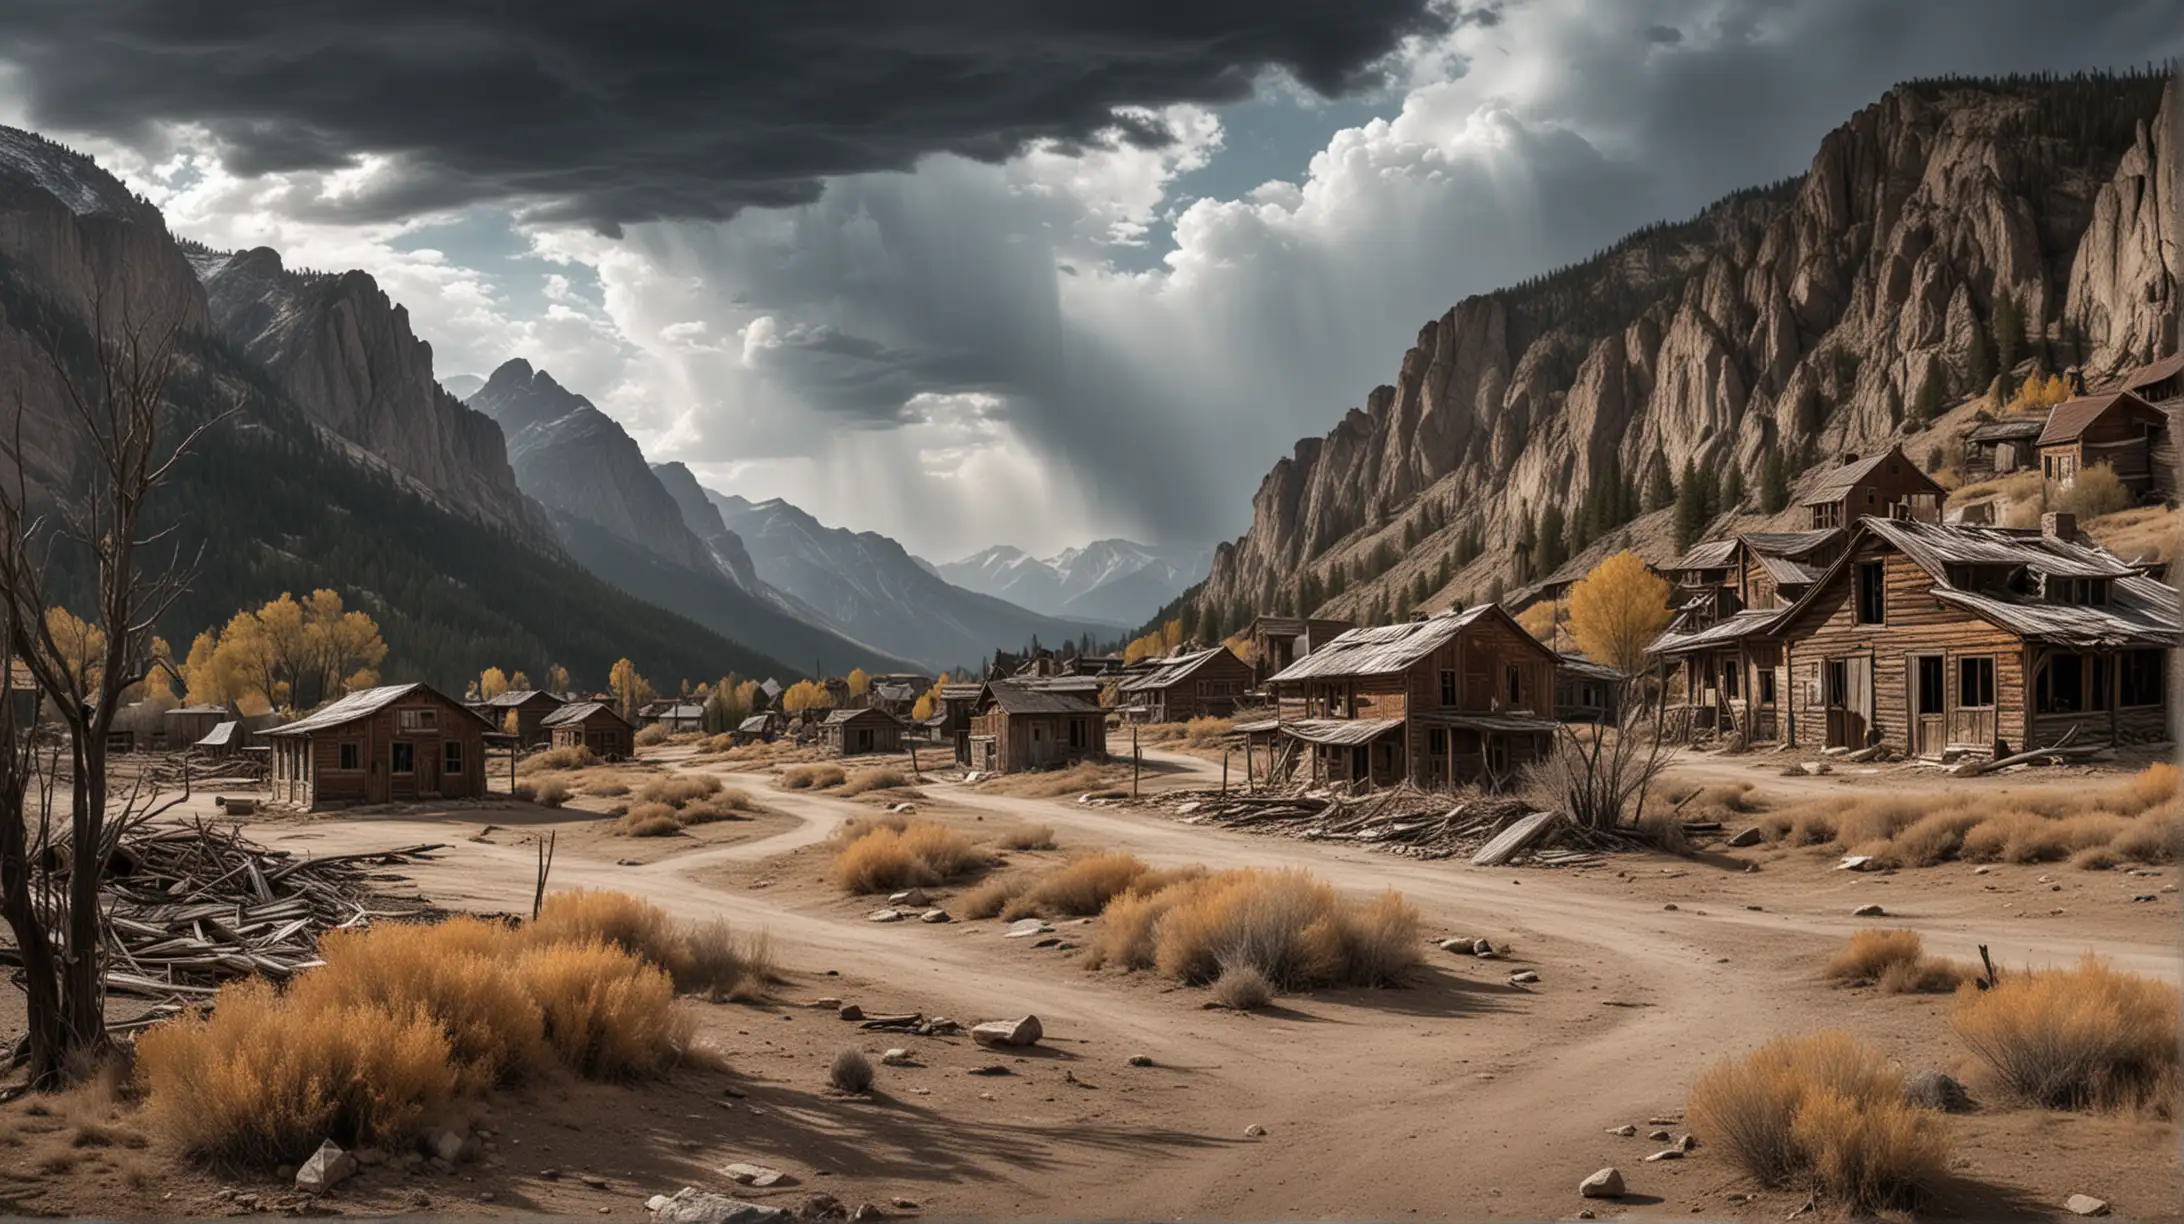 A ghost town in the Rocky Mountains, deserted, mountains and trees, sad scene, dramatic sky